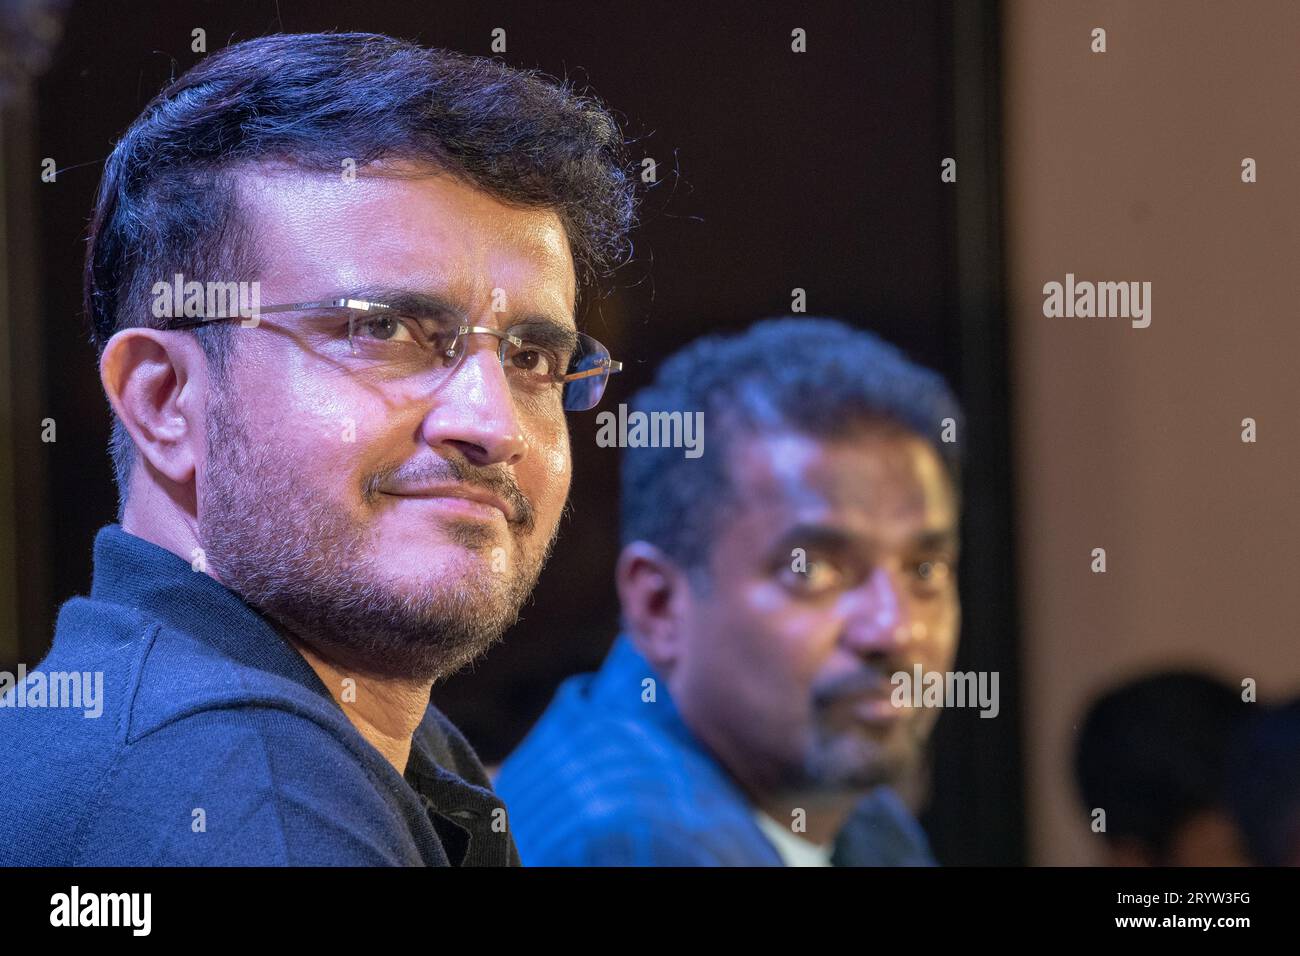 Legendary Sri Lankan cricketer Muthiah Muralidaran and Former Indian Cricket Captain and BCCI President Sourav Ganguly seen during the promotion of film 800, a biopic based on the life and career of cricketer Muthiah Muralidaran. Stock Photo